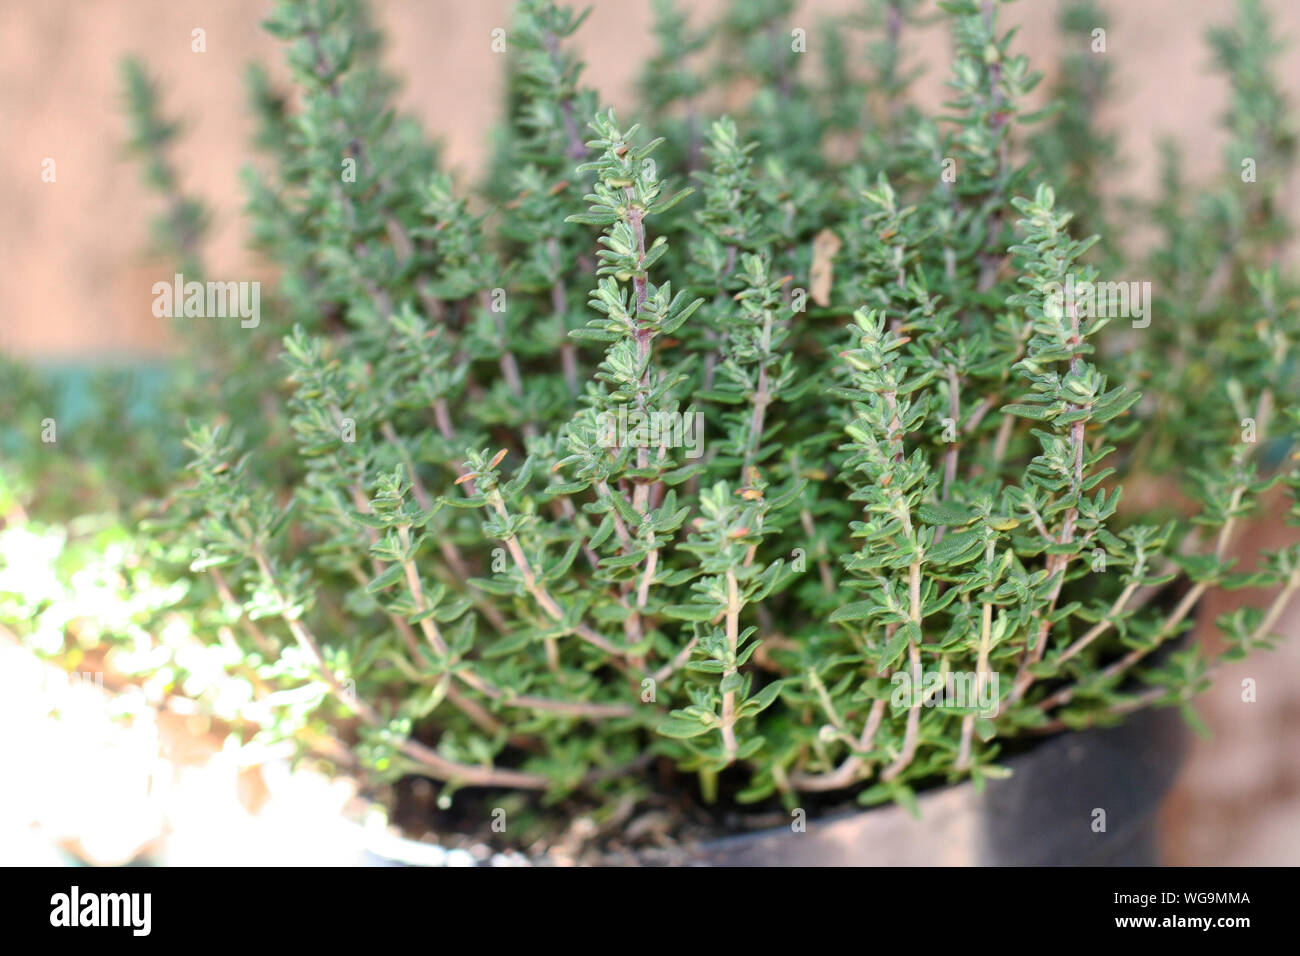 Close up Of Thyme Plant Stock Photo   Alamy